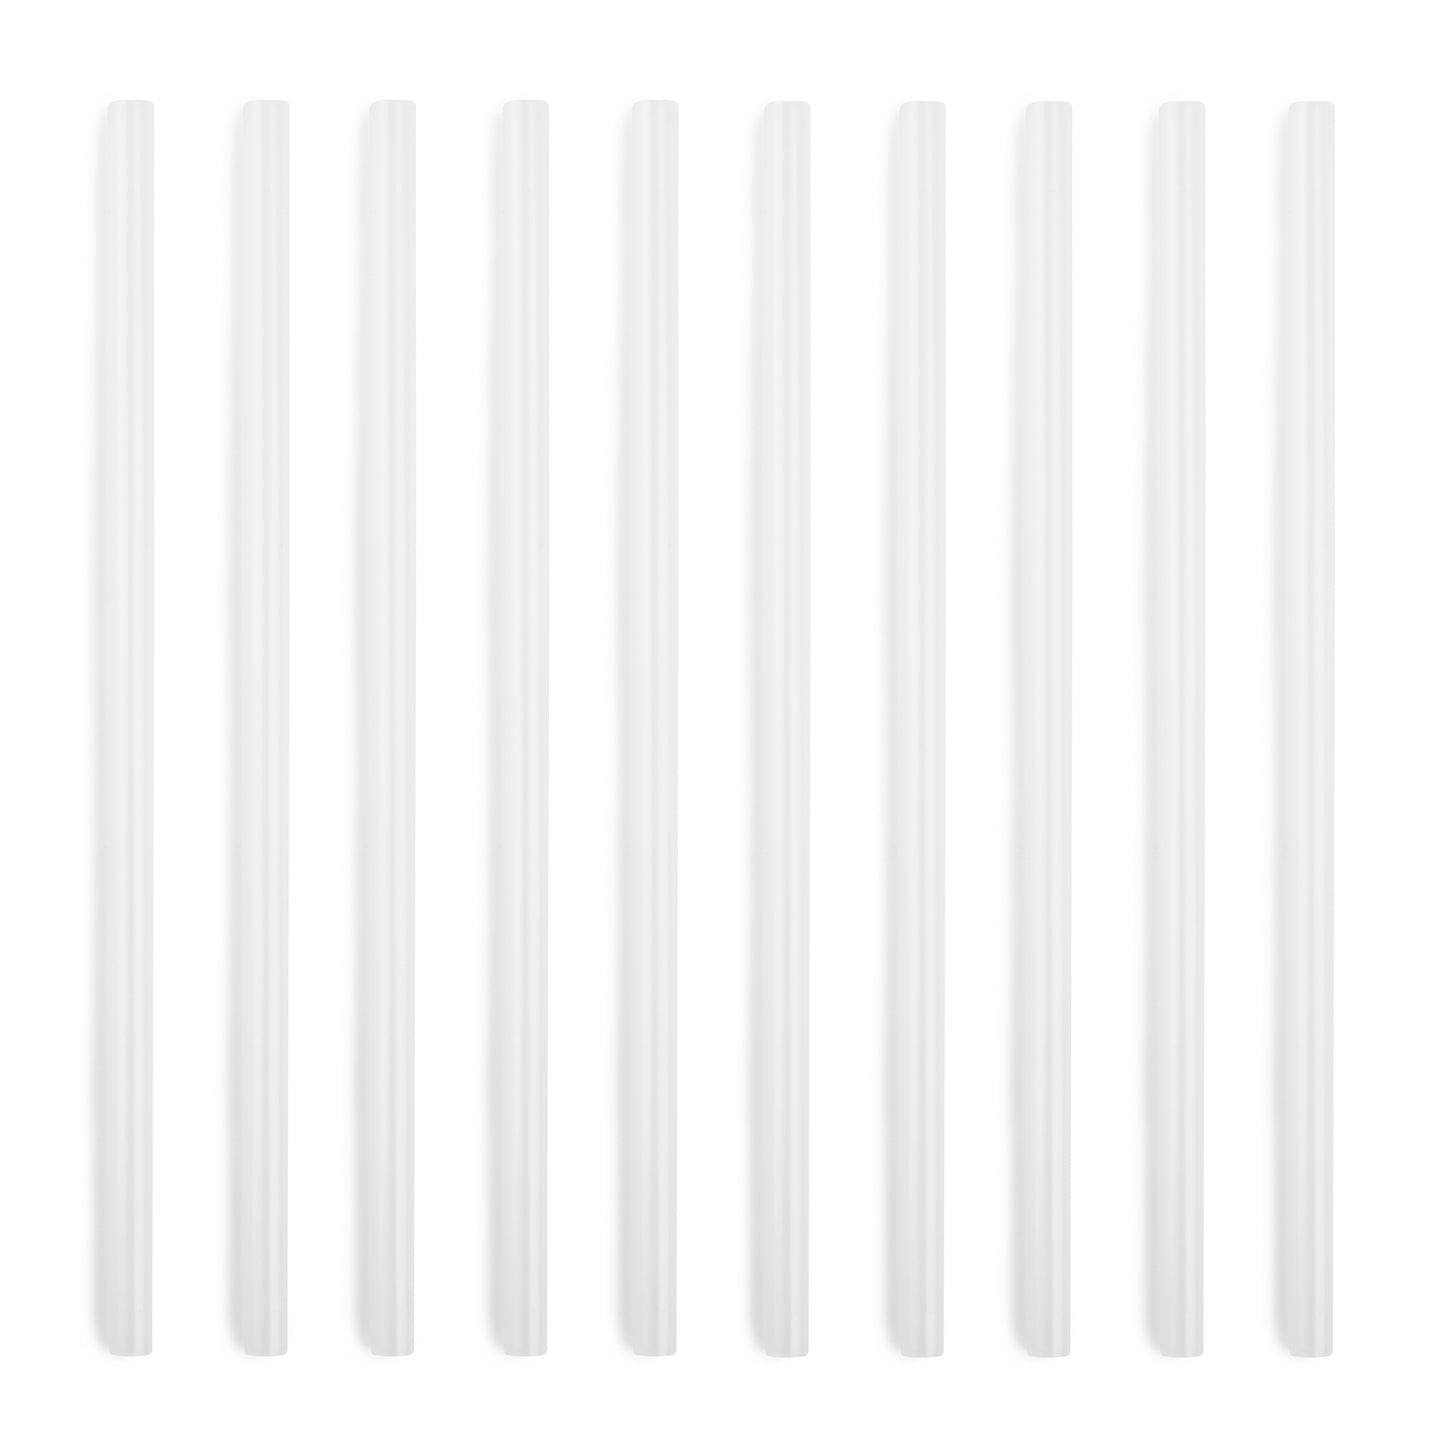 Set of 10 Cut To Fit Ranger Pro Bottle Collections Replacement Straws - Manna Hydration